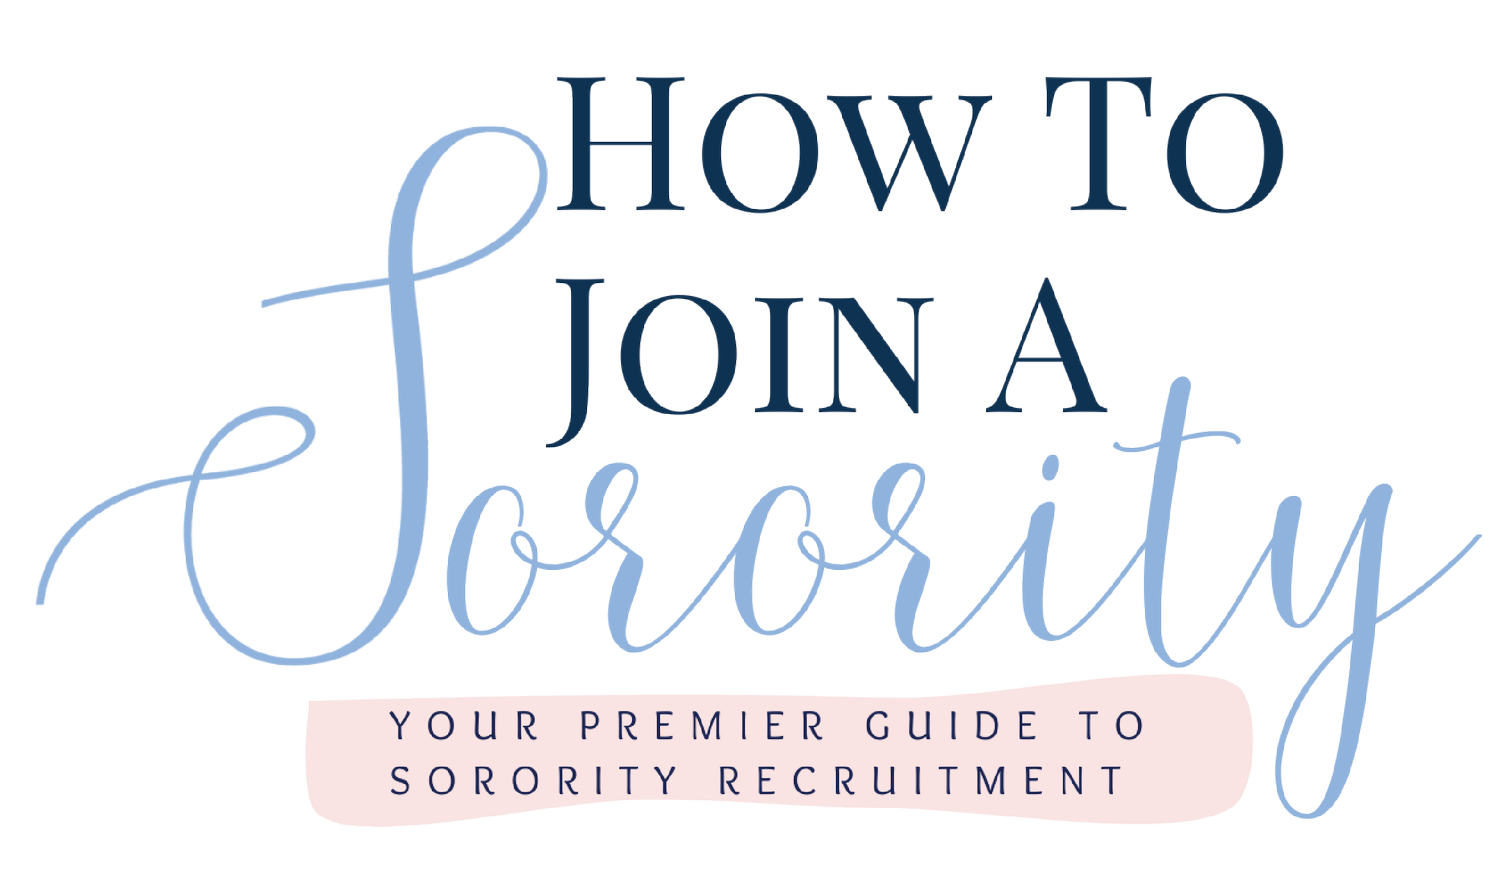 How To Join A Sorority - Your Premier How To Guide